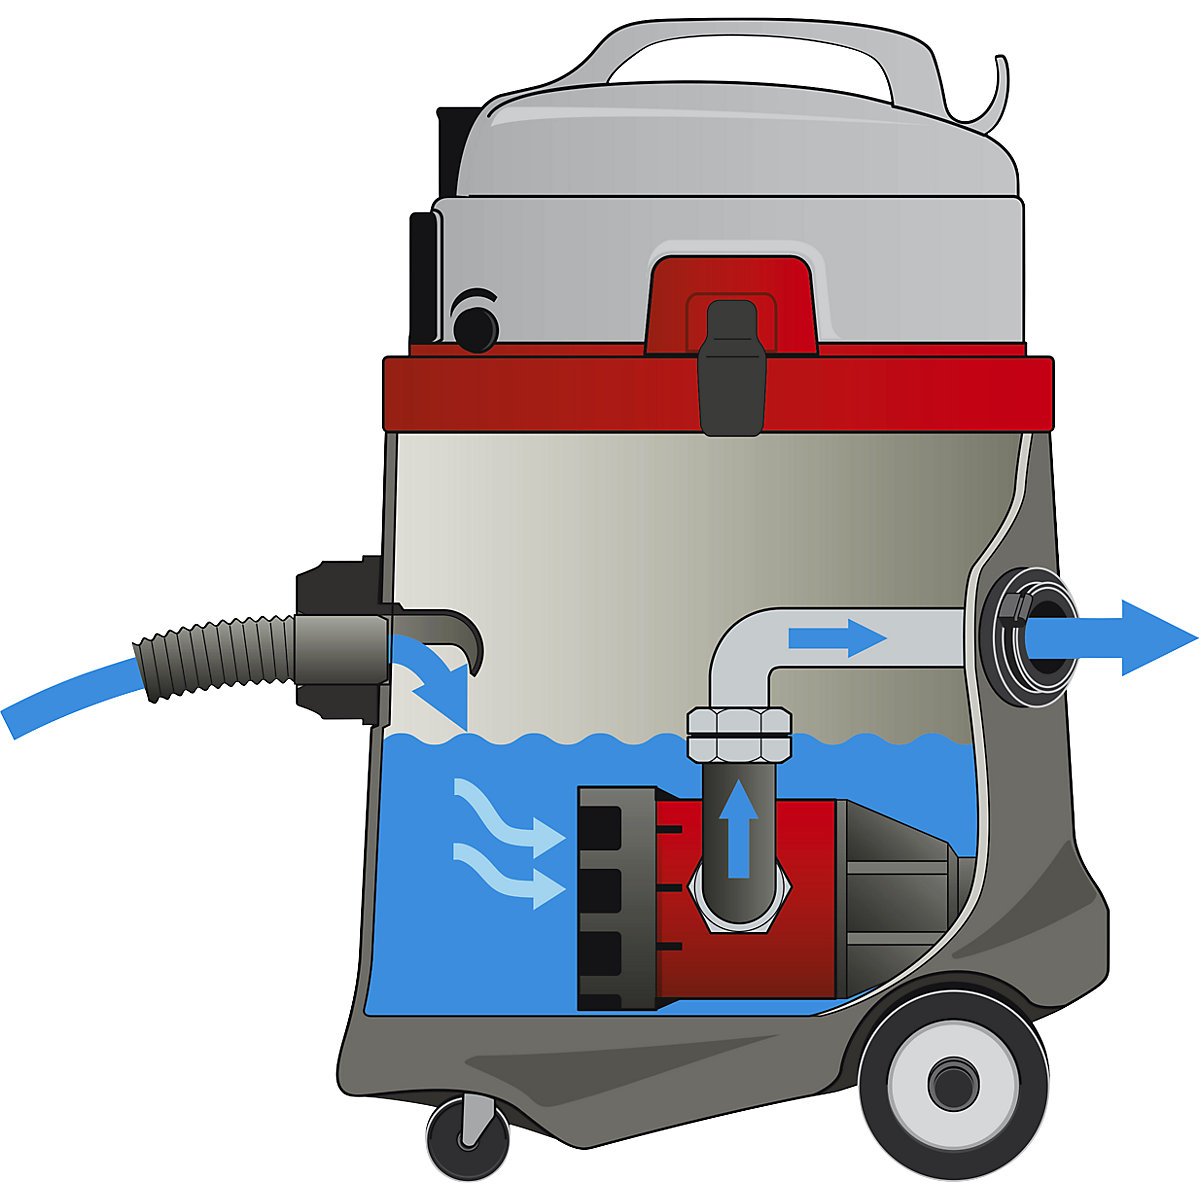 Wet and dry vacuum cleaner – Sprintus (Product illustration 3)-2